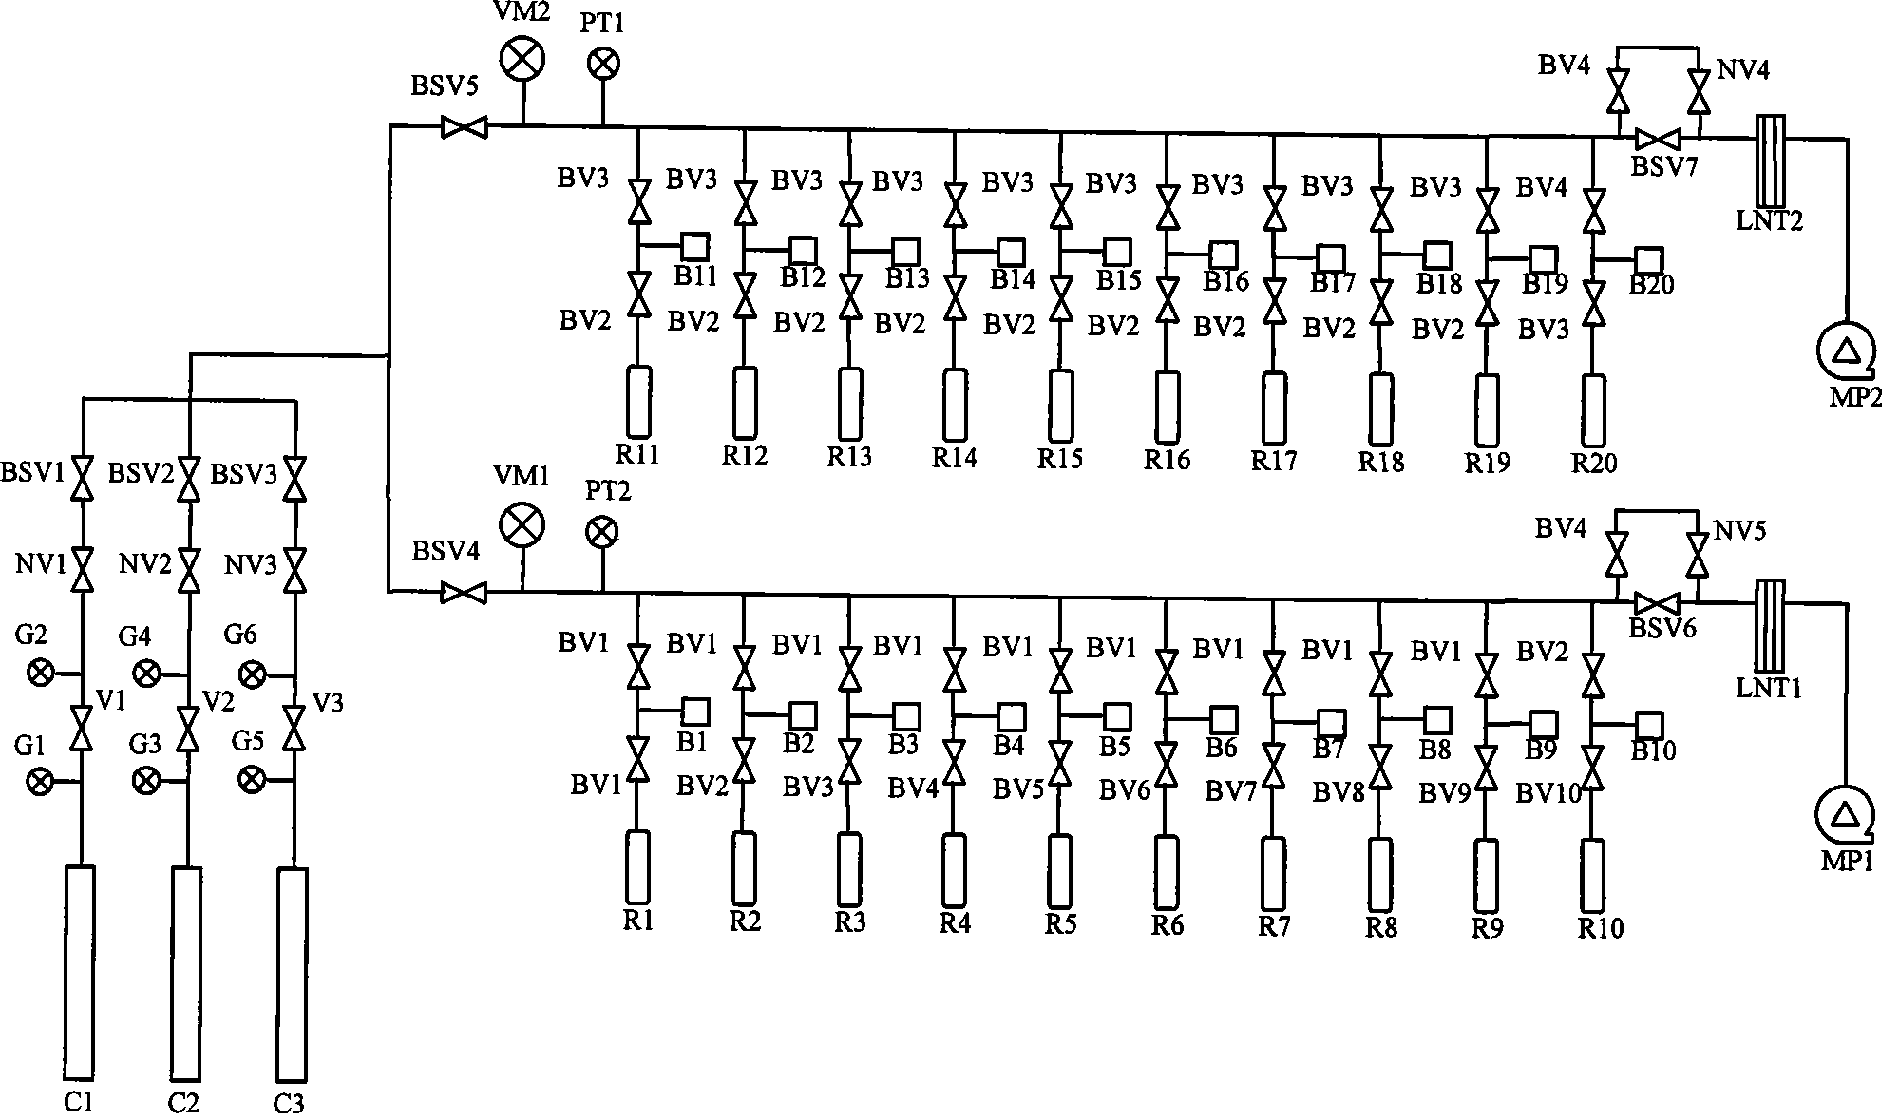 Accelerator mass spectrometry carbon-14 dating and sampling device